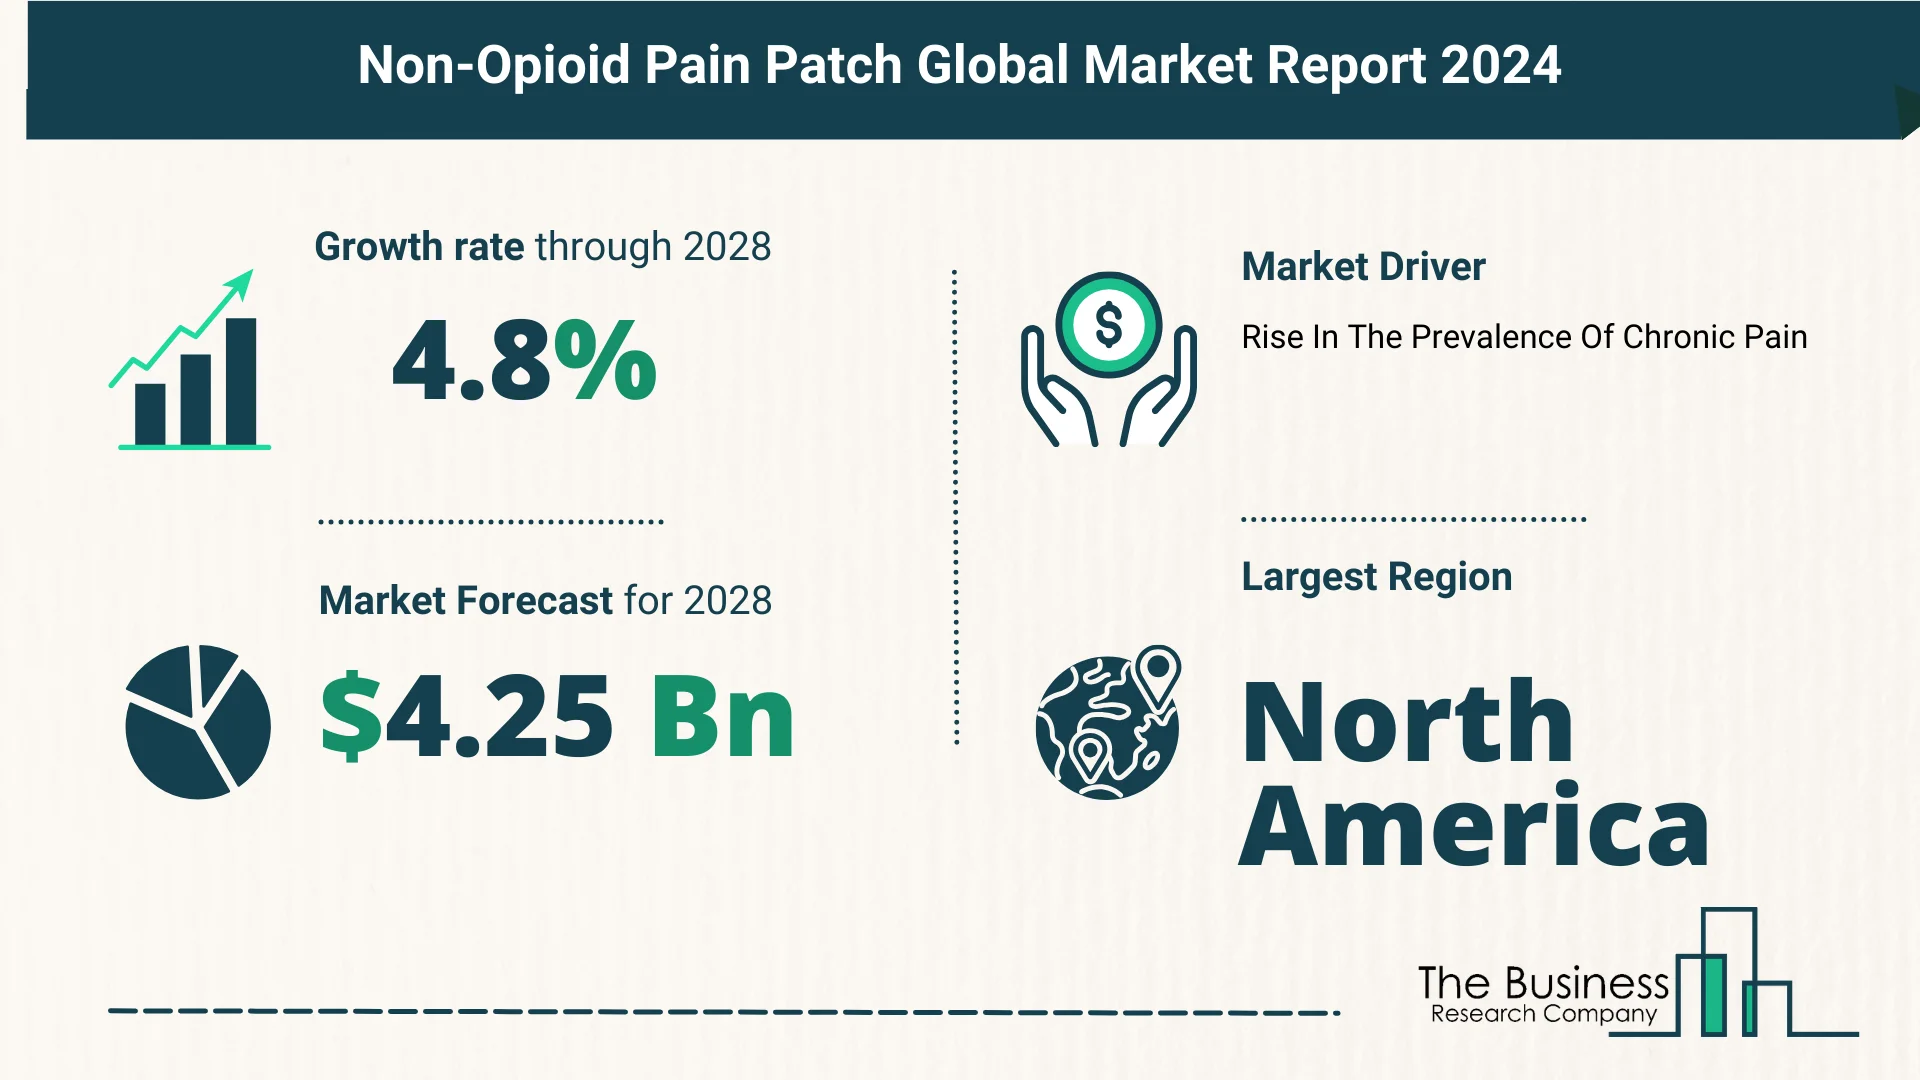 Global Non-Opioid Pain Patch Market Trends